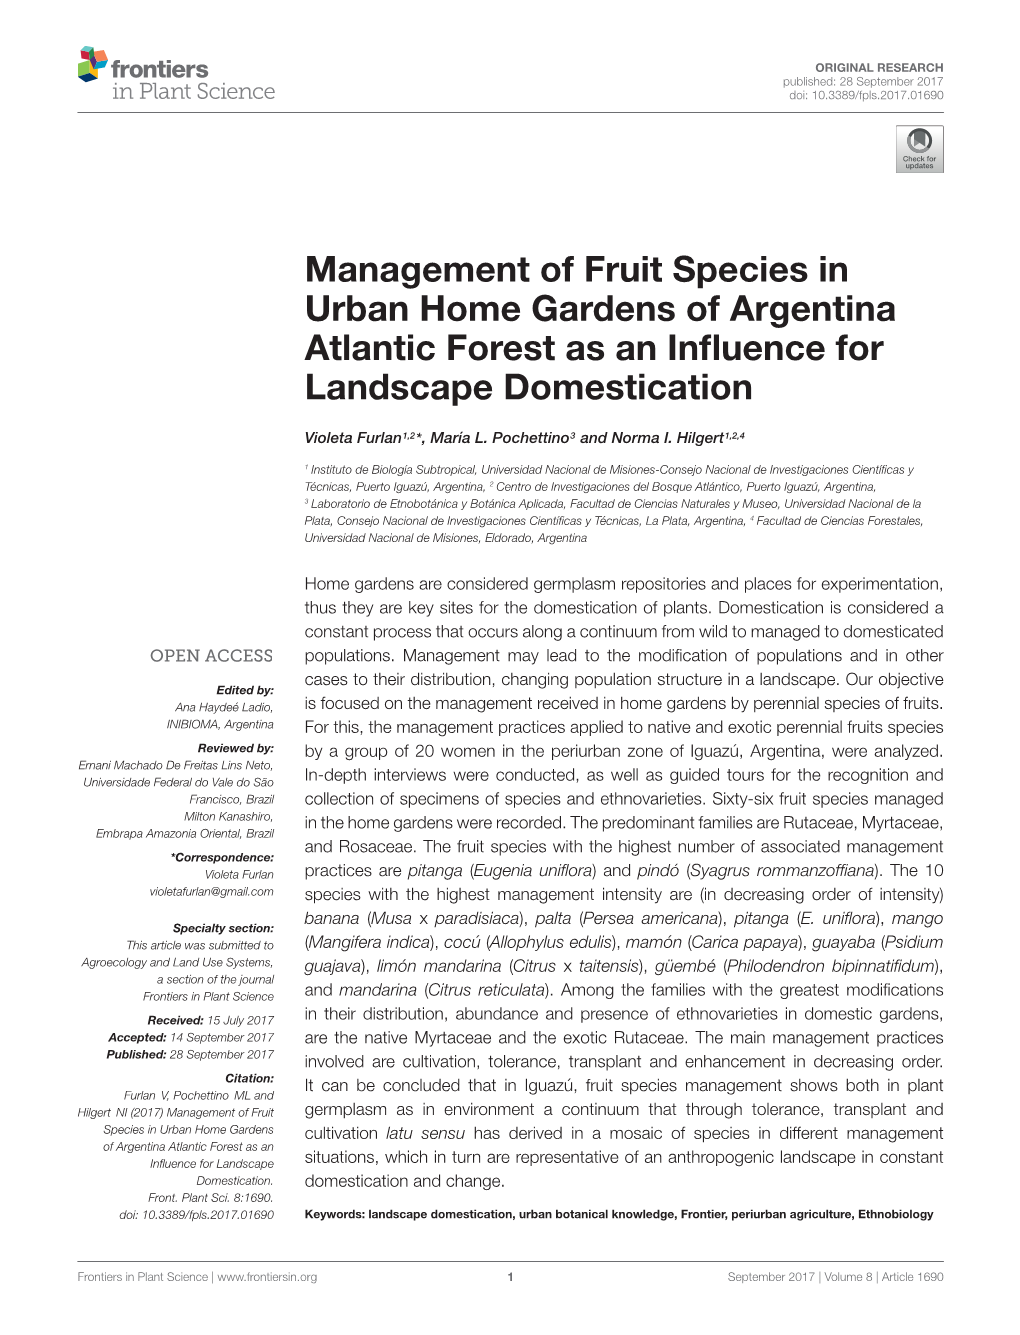 Management of Fruit Species in Urban Home Gardens of Argentina Atlantic Forest As an Inﬂuence for Landscape Domestication